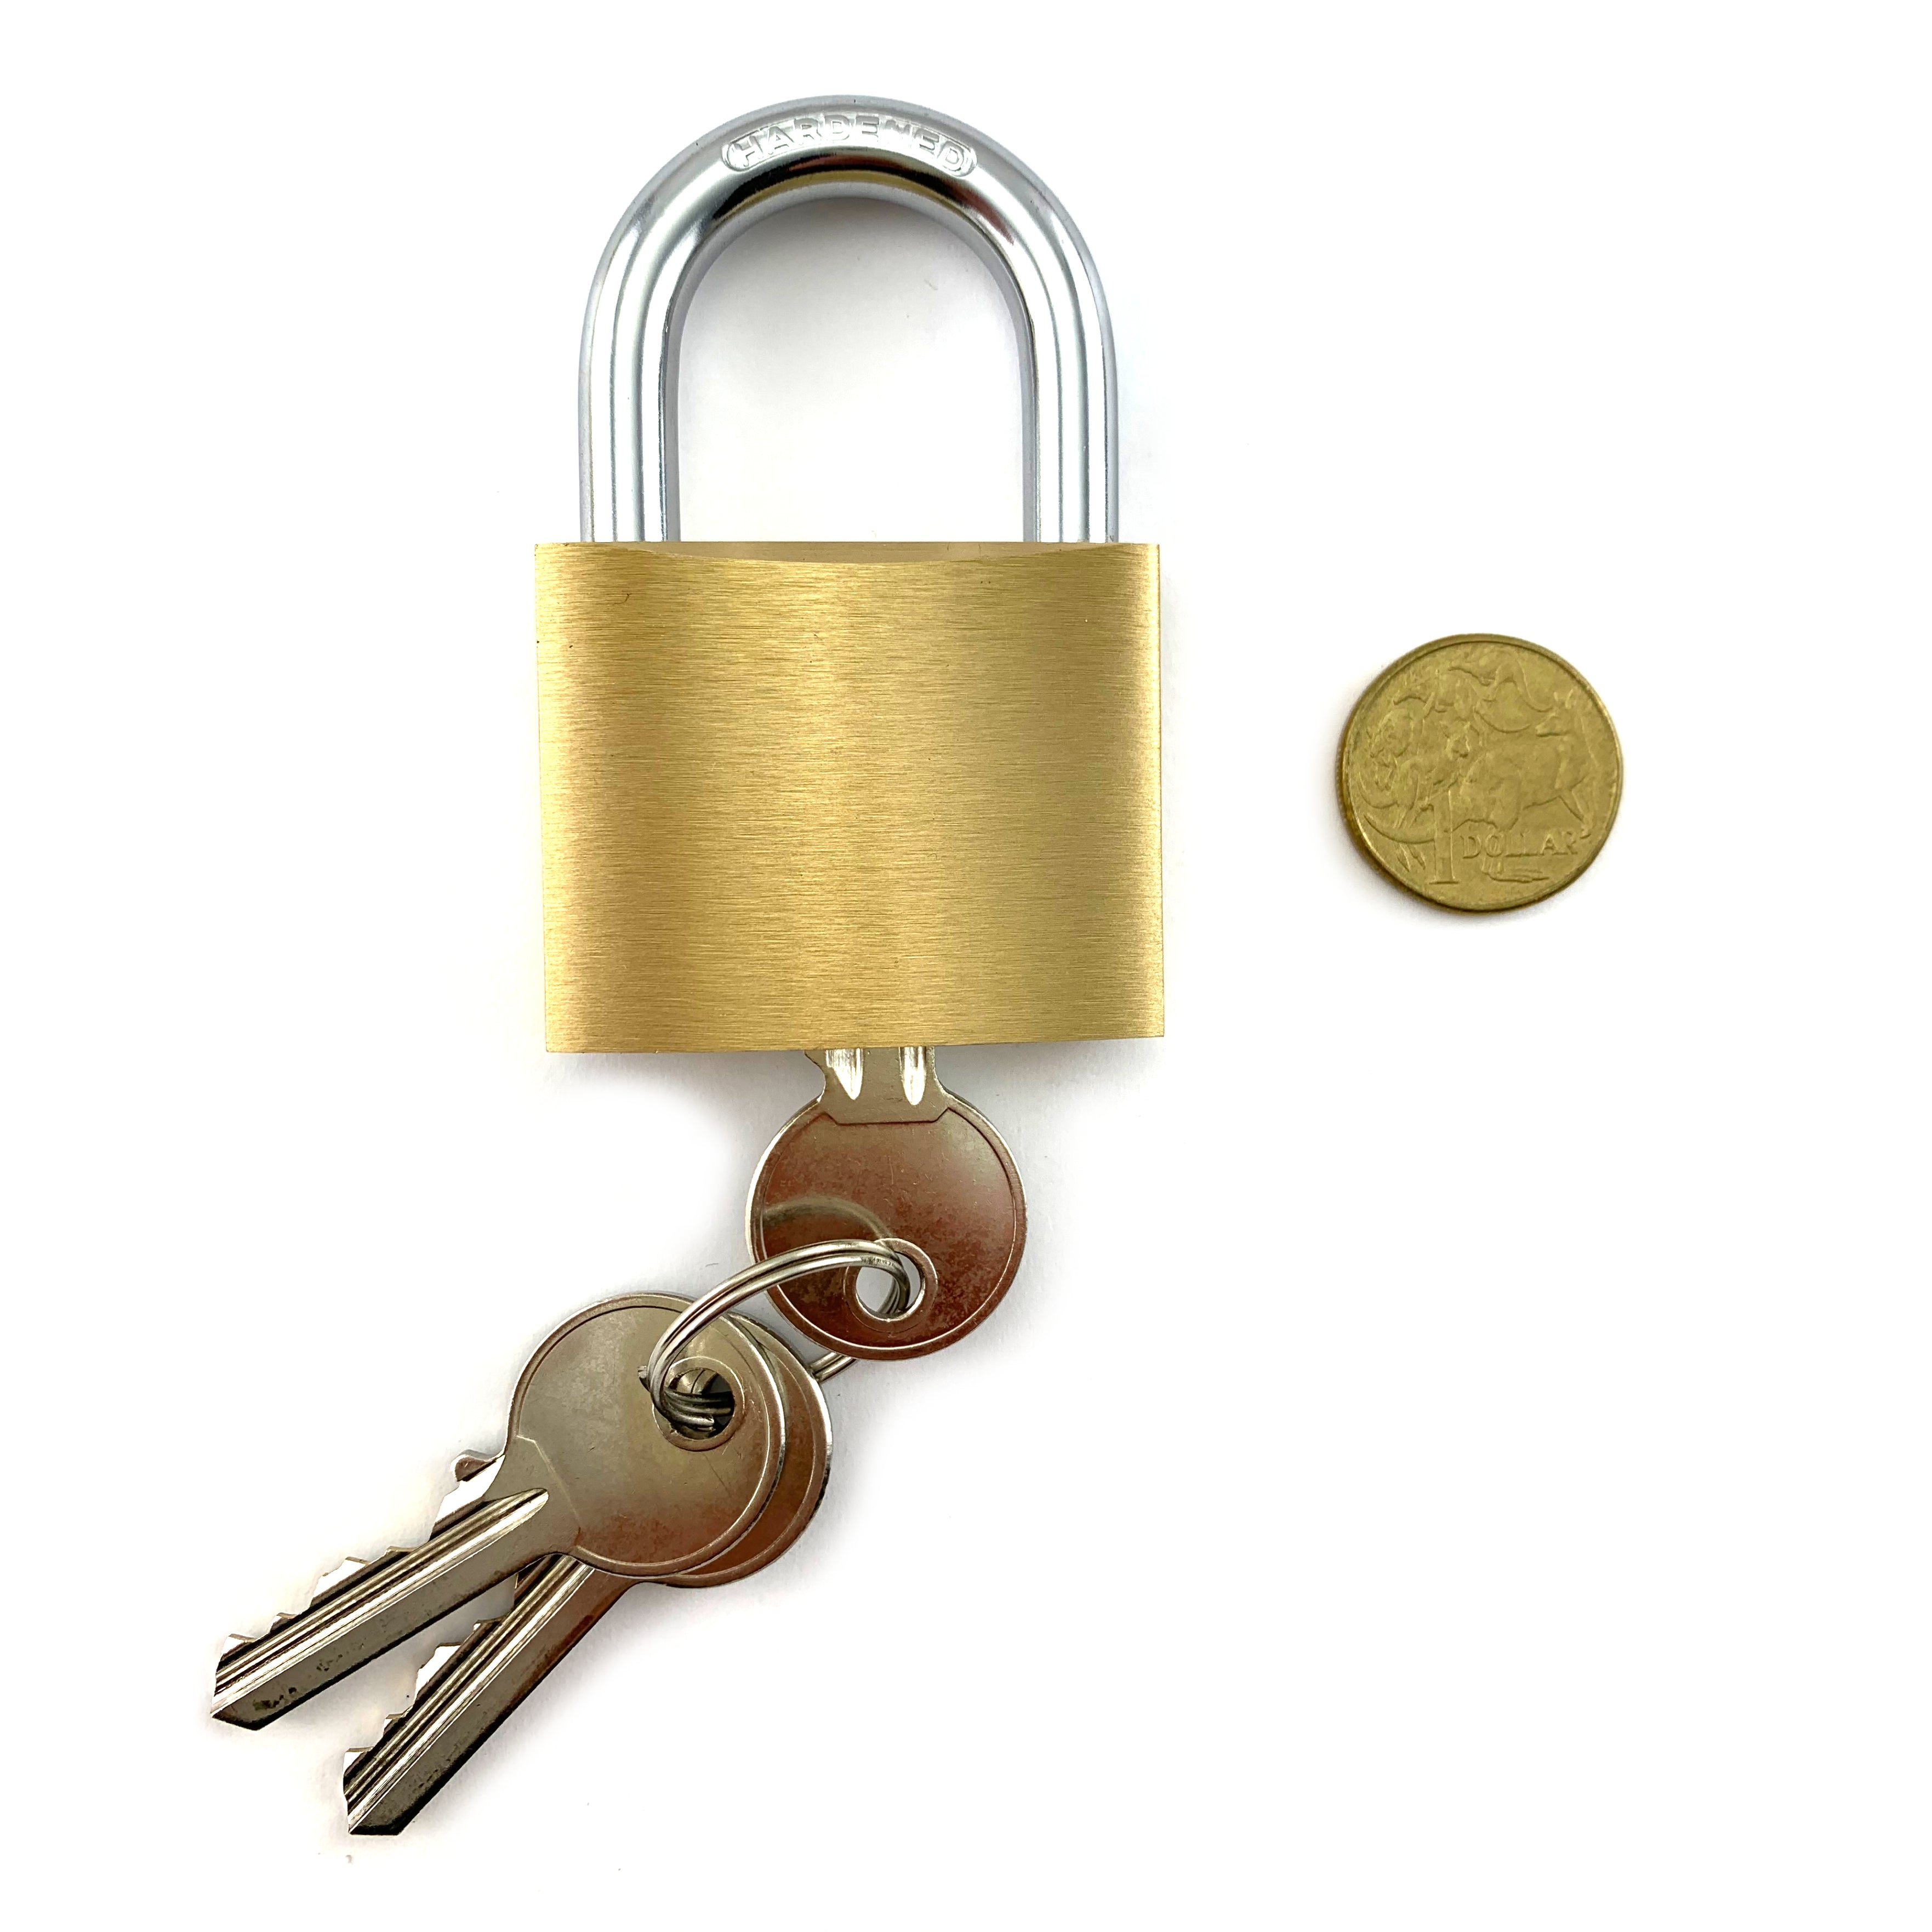 Brass Padlock, hardened steel and brass. Medium size, 8mm shackle. Australia wide delivery.